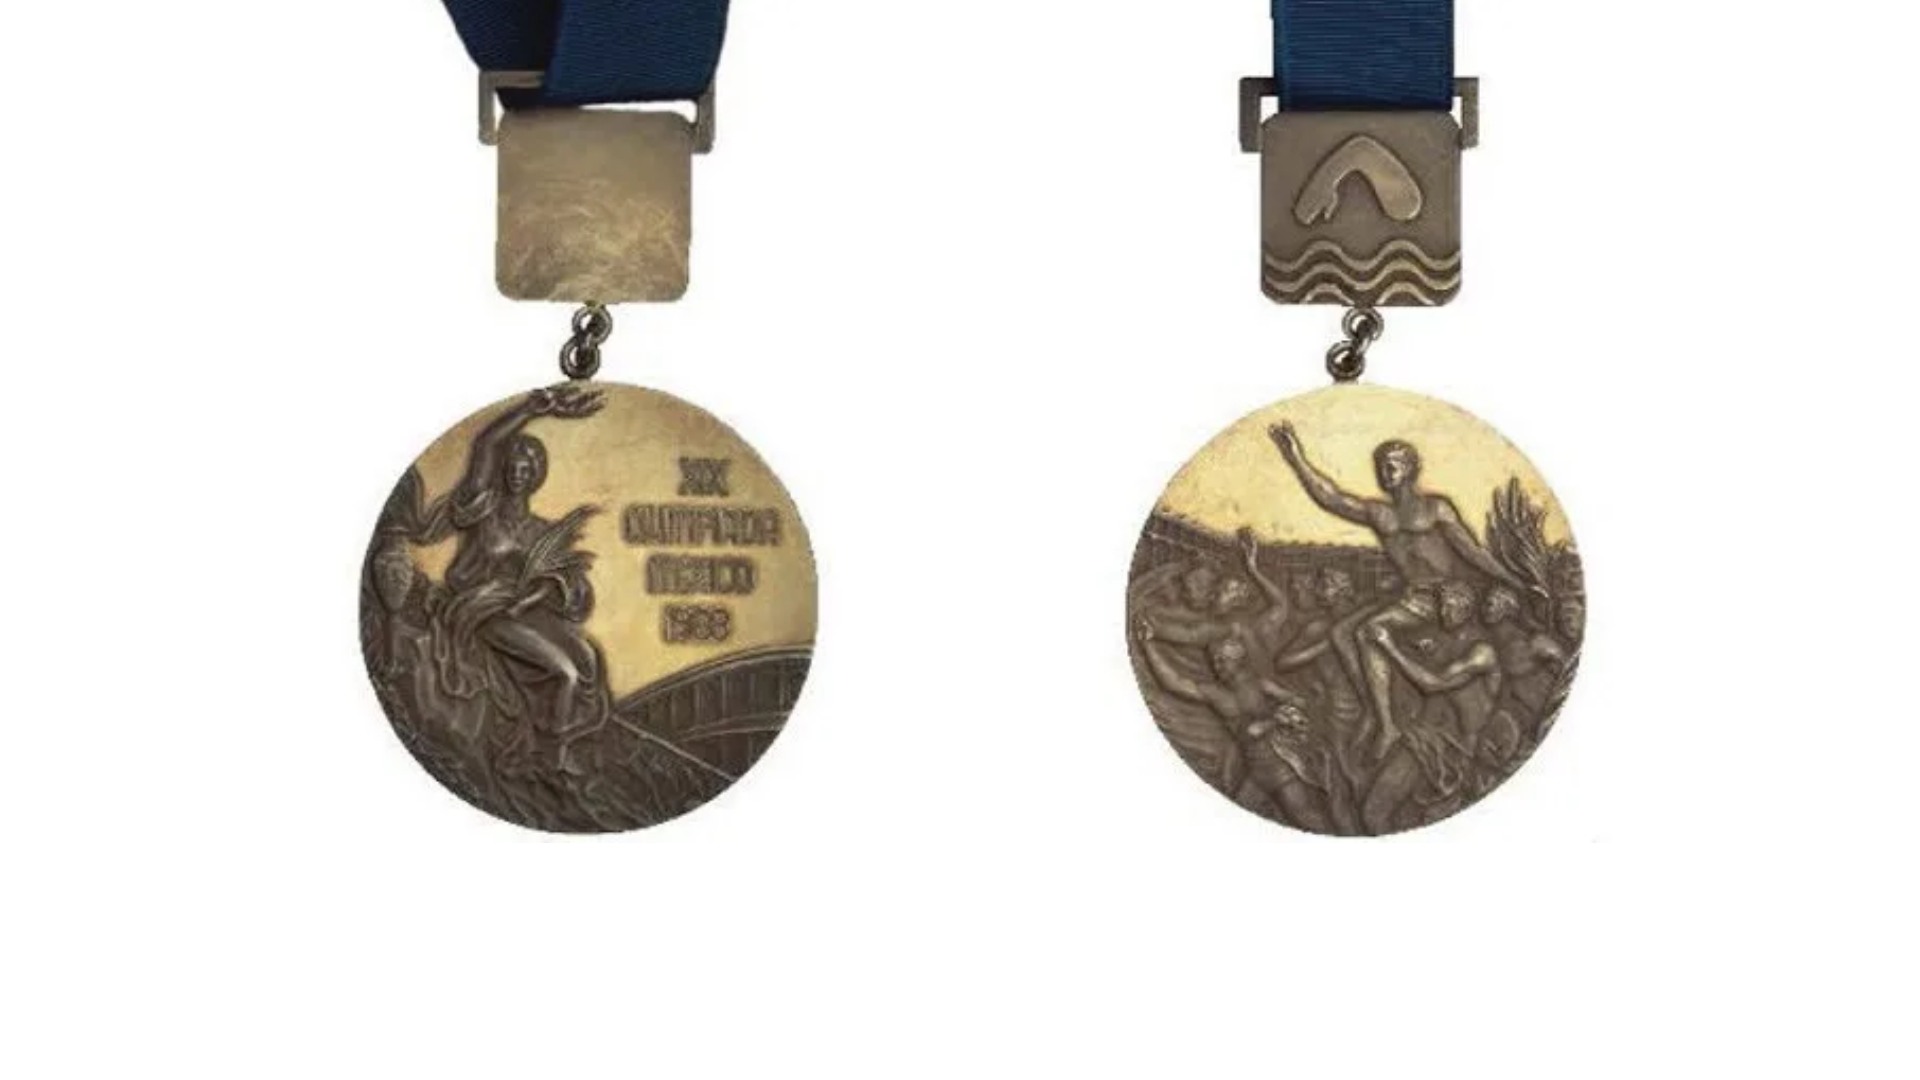 1968 Olympic Medal